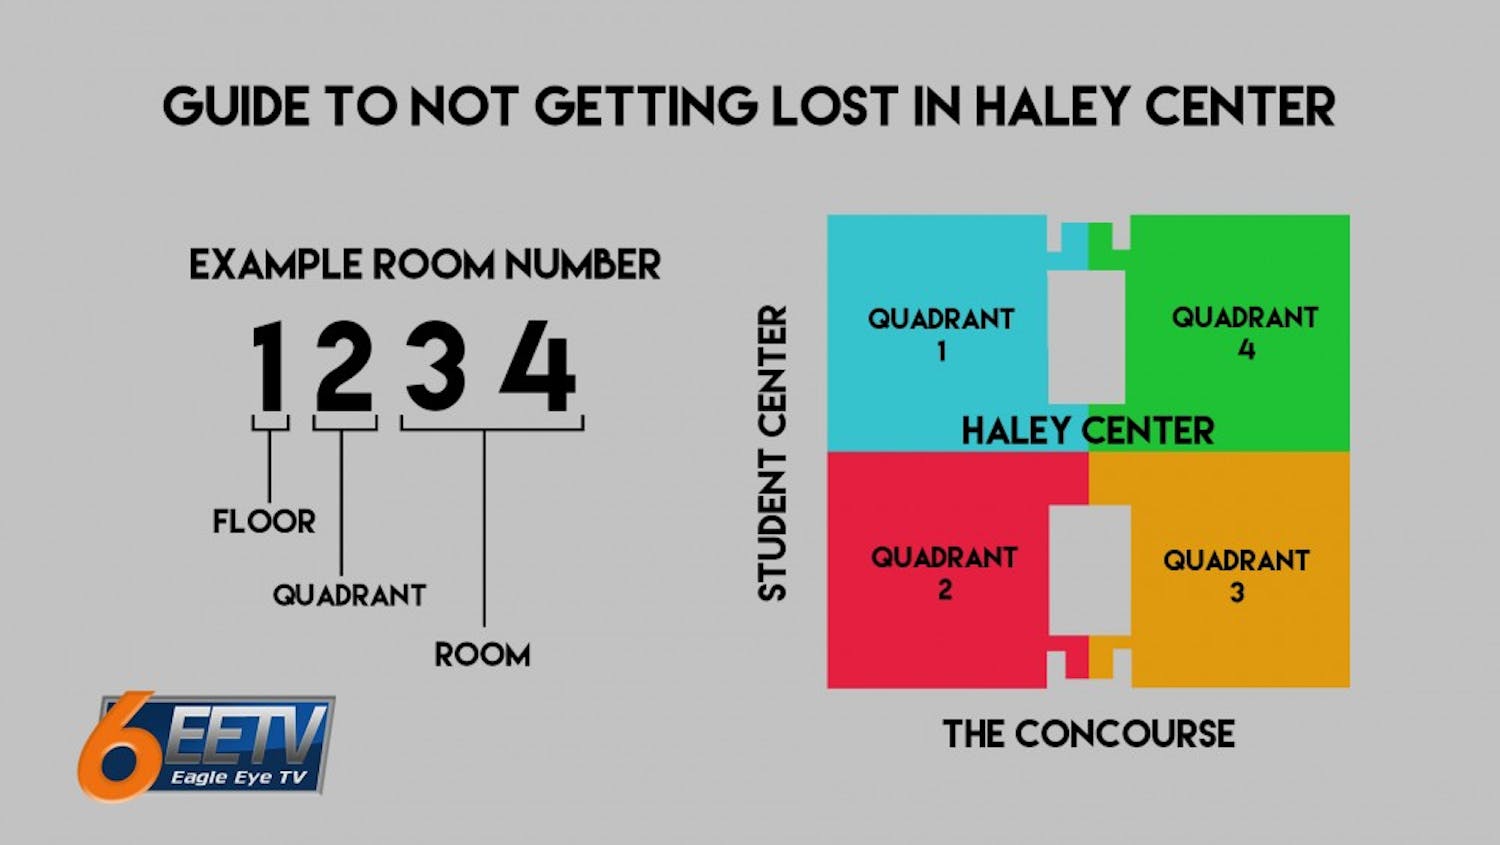 Map of Haley Center